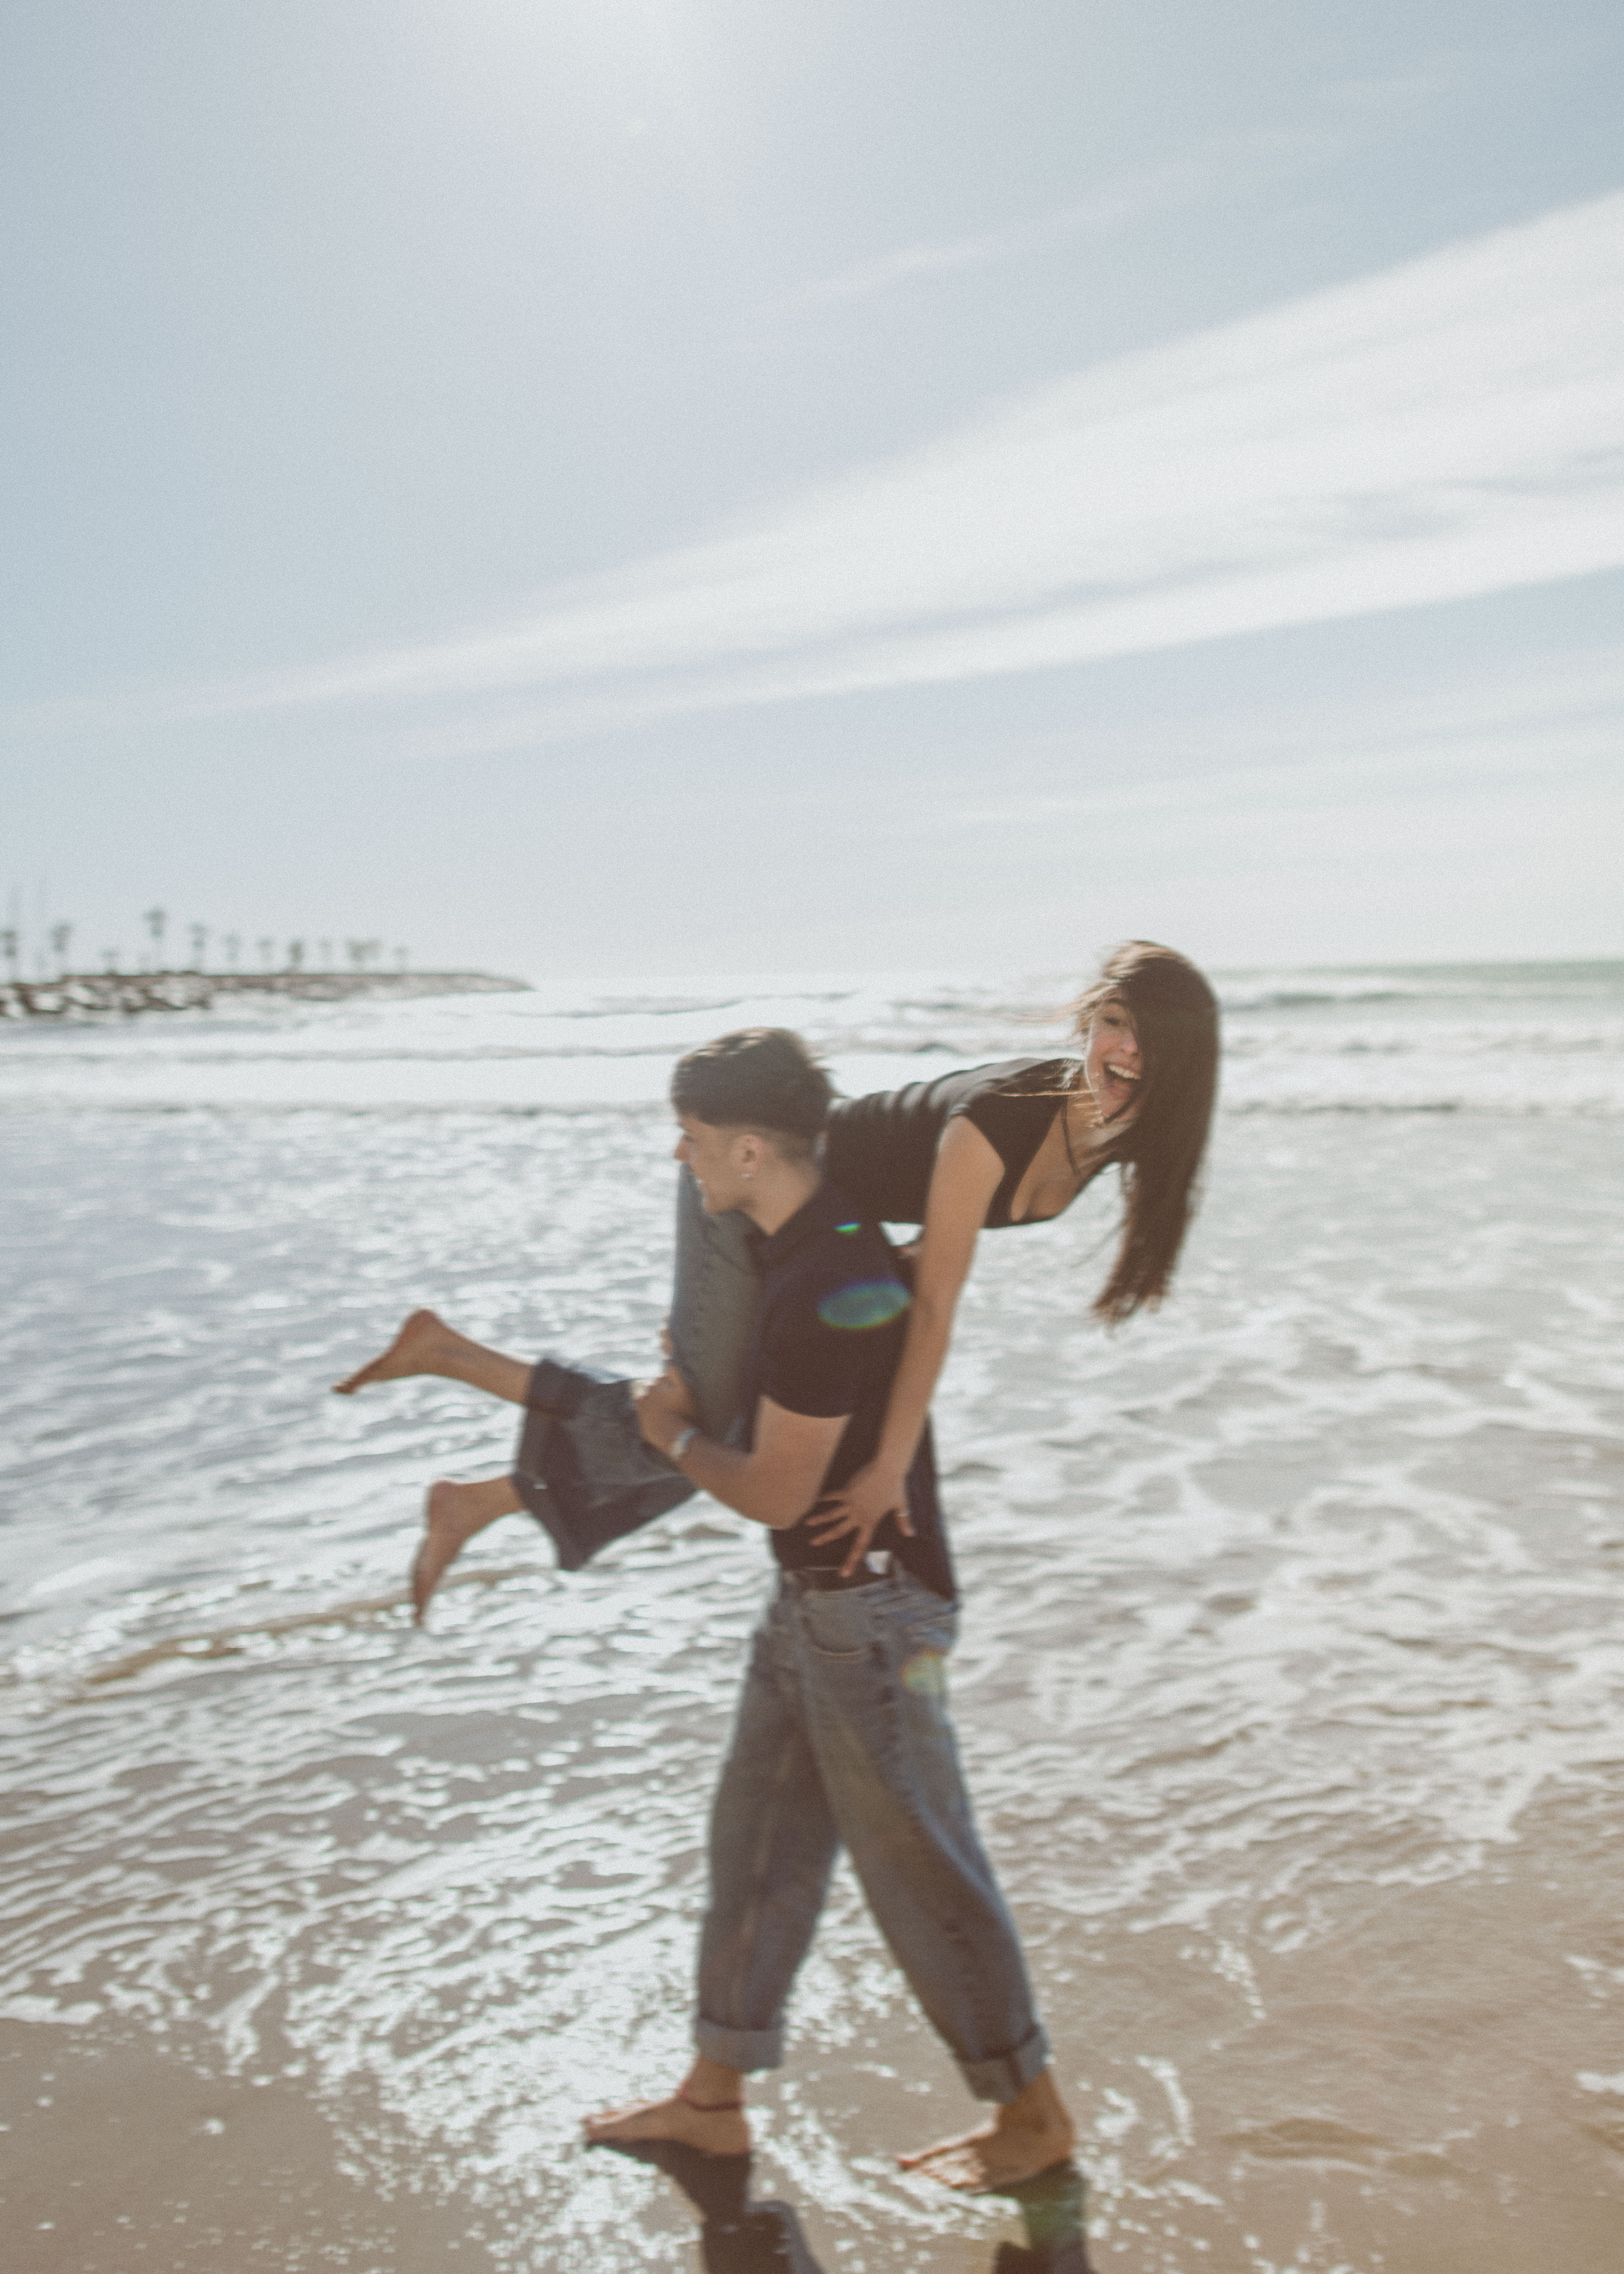 Coastal Escapes: Creative Couple Photography by Sitges' Beaches